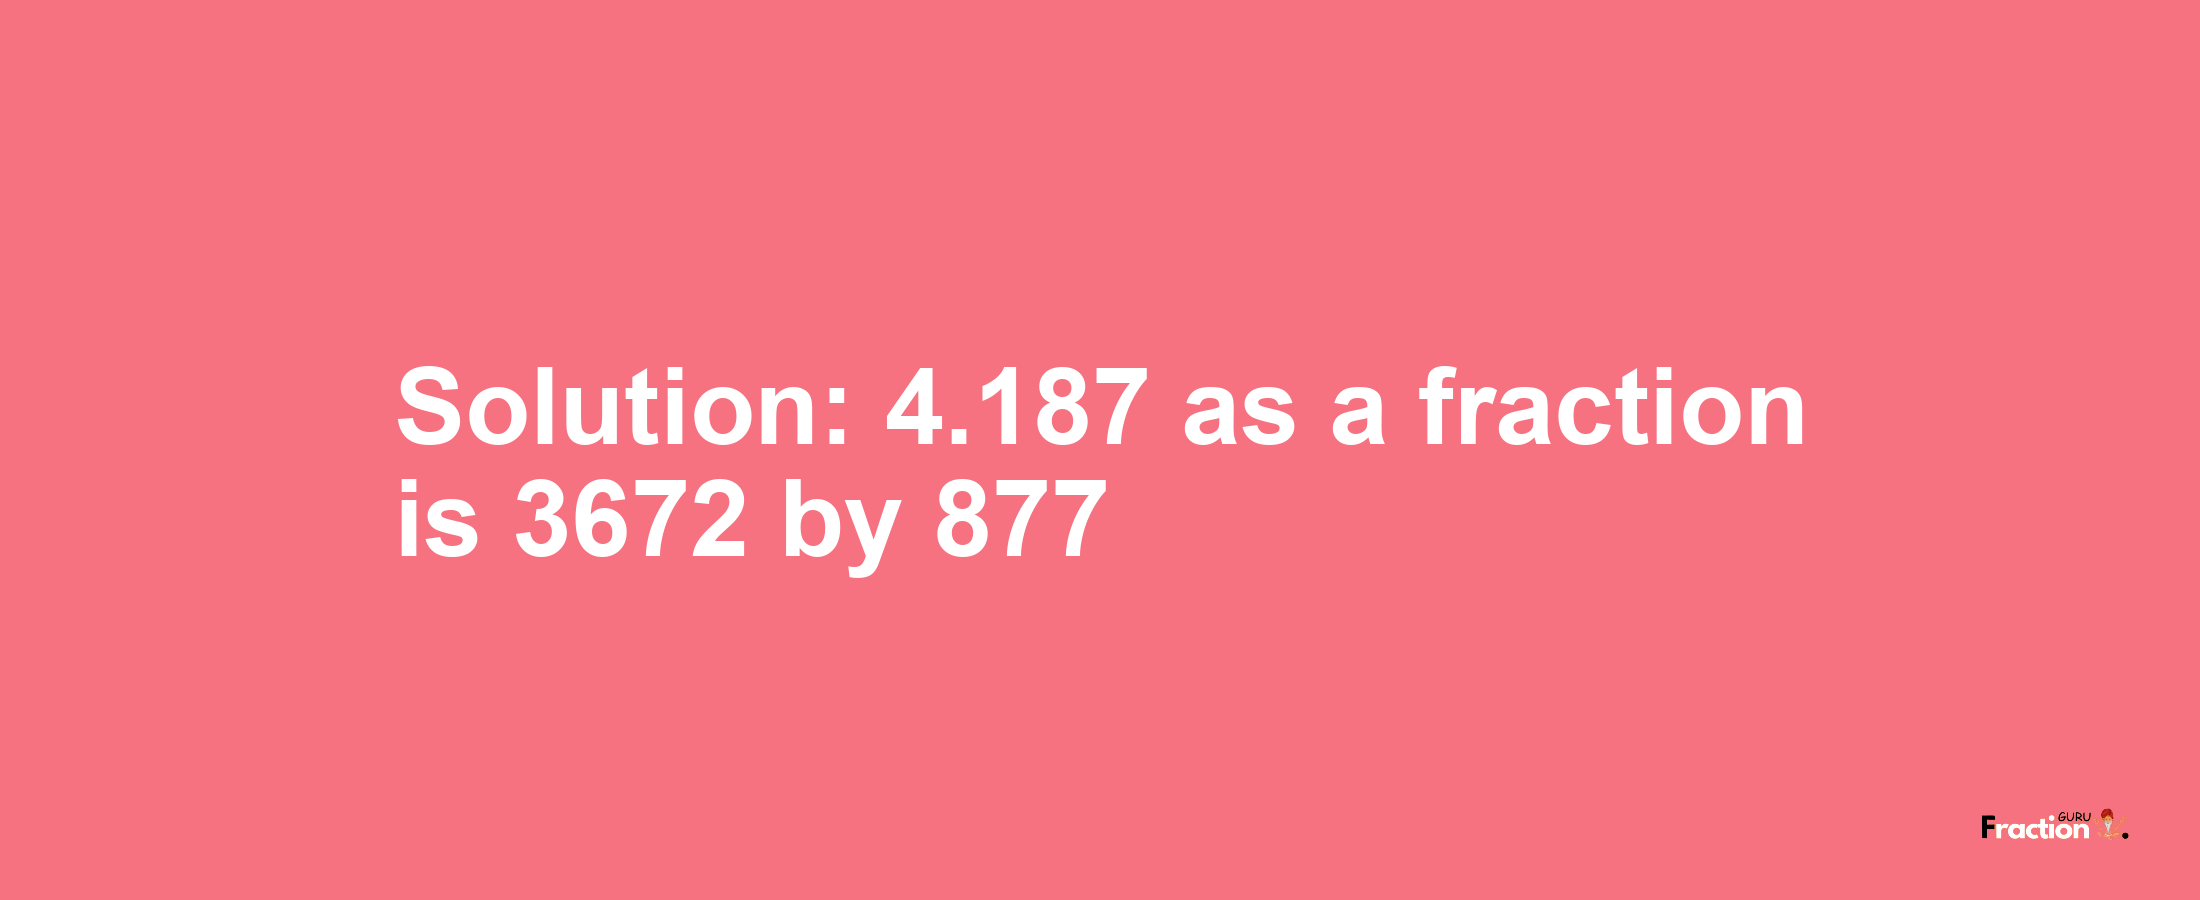 Solution:4.187 as a fraction is 3672/877